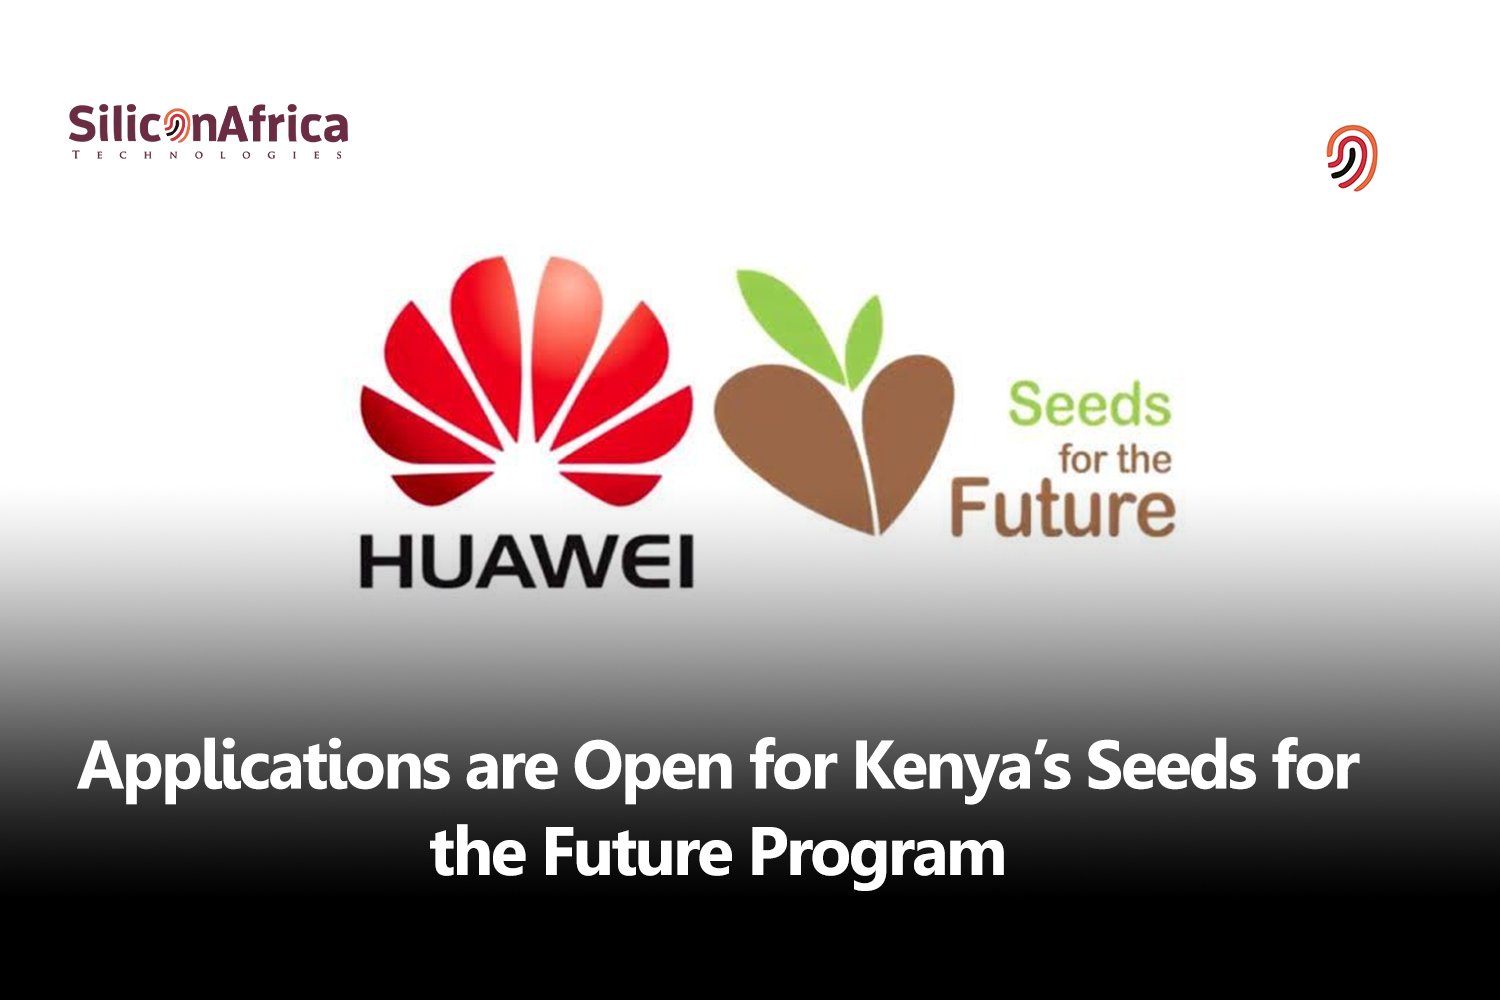 Seeds for the Future Program